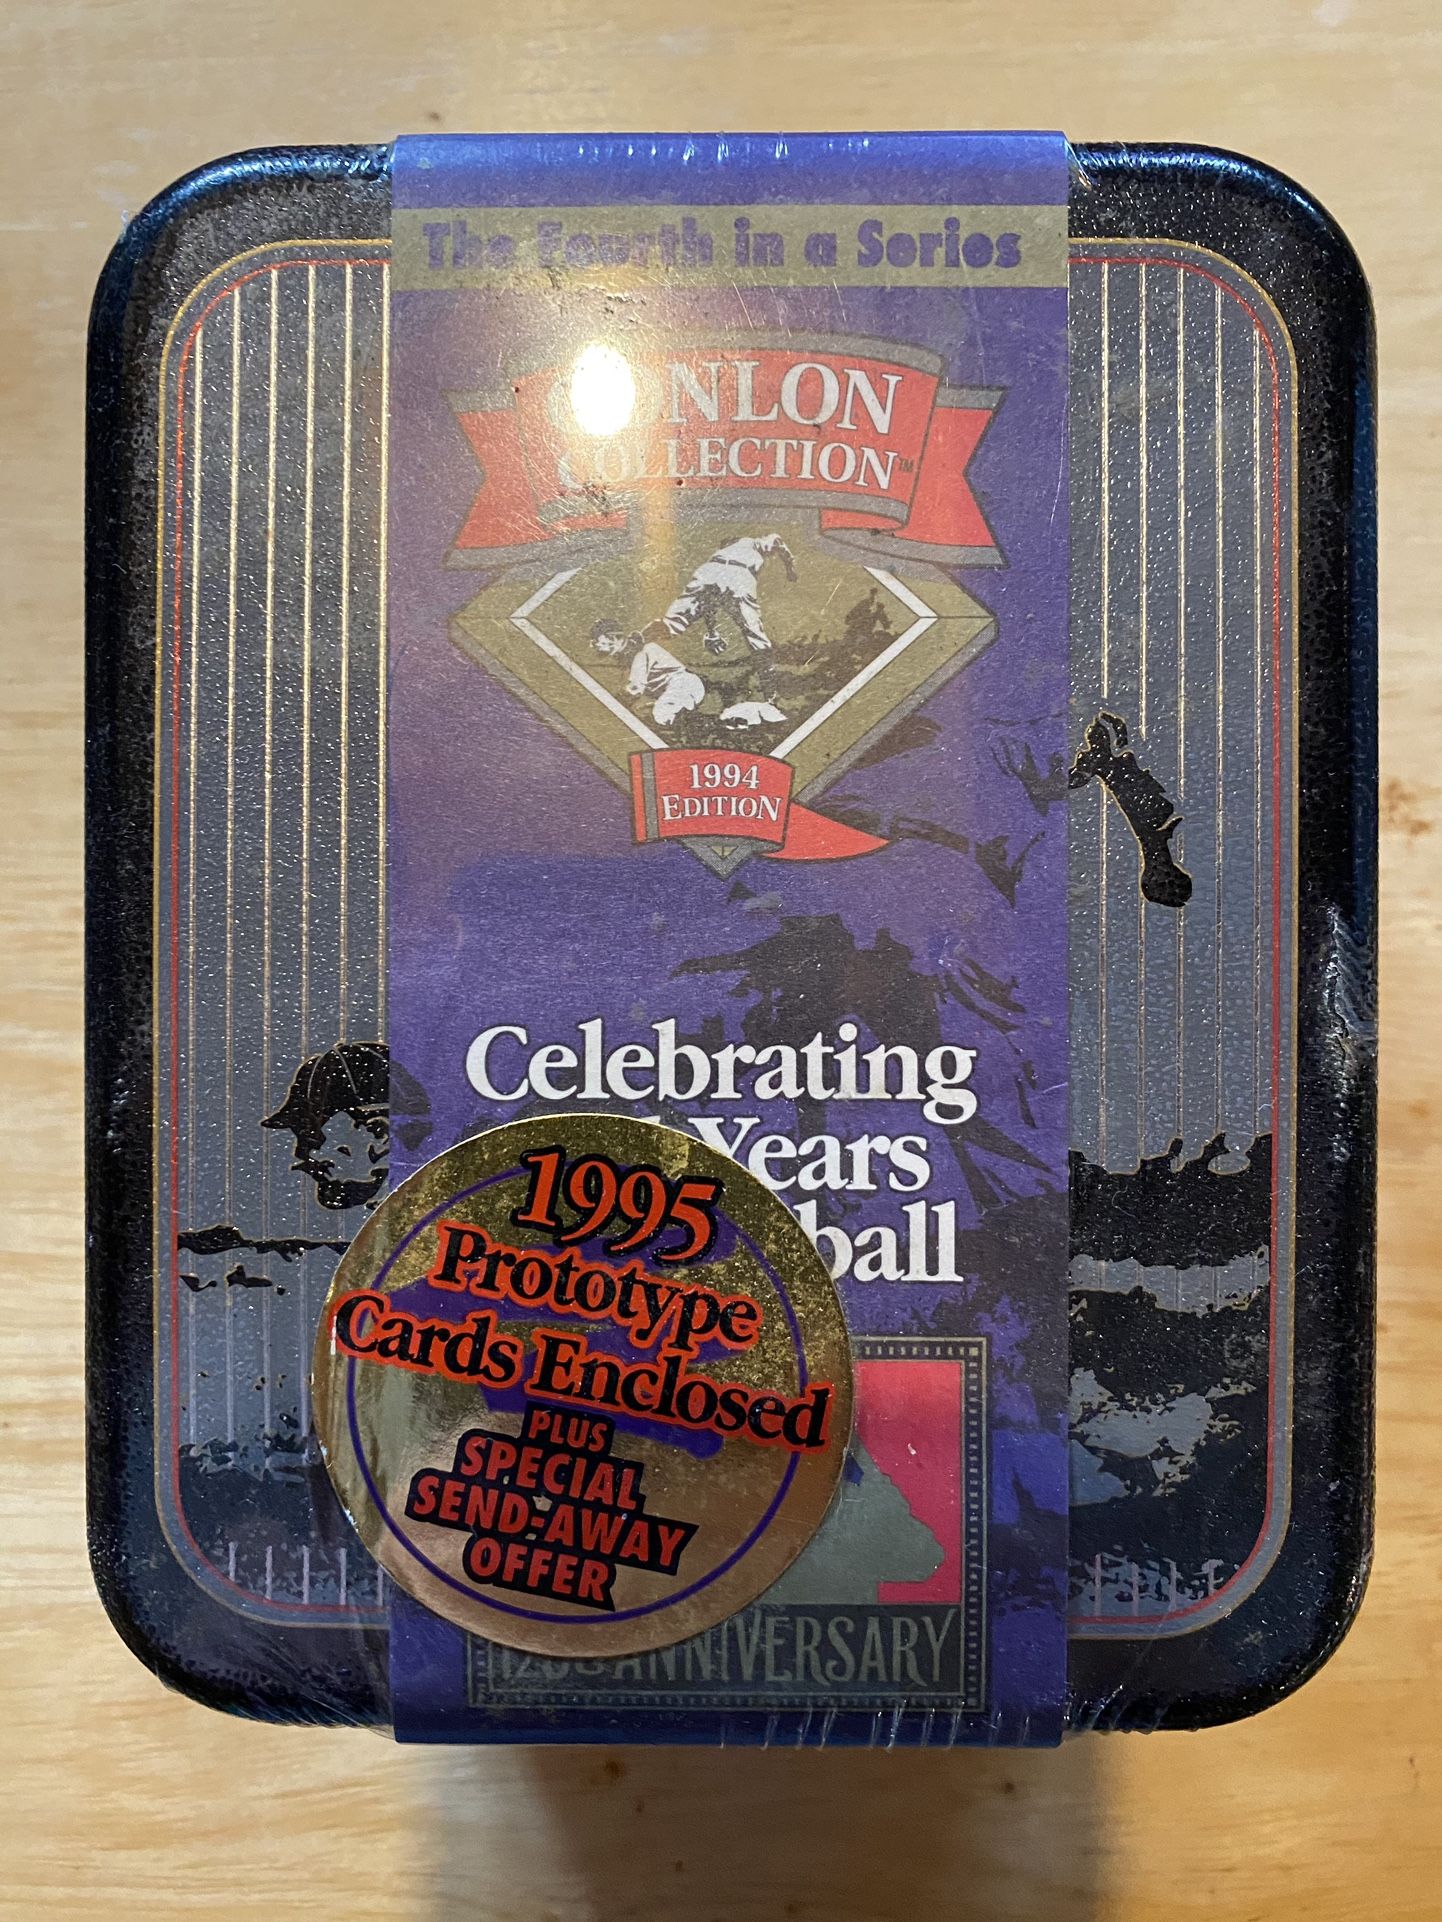 1994 Conlon Collection 125 Years Of Baseball 1995 Prototypes Enclosed 330 cards